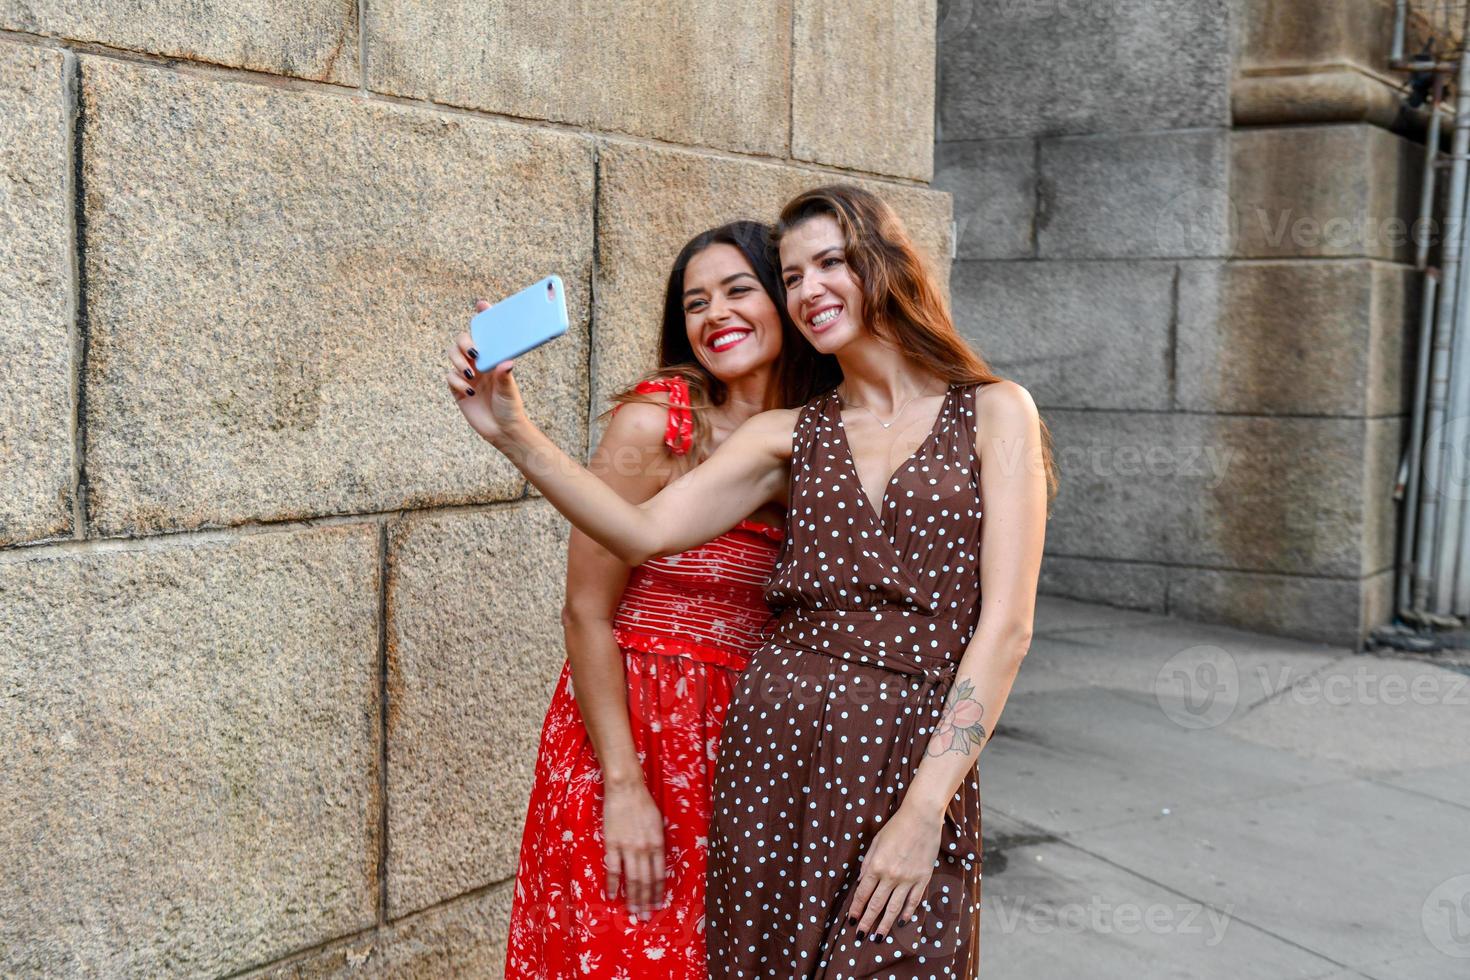 Two girls interacting with a mobile phone and taking silly selfie photos in New York City